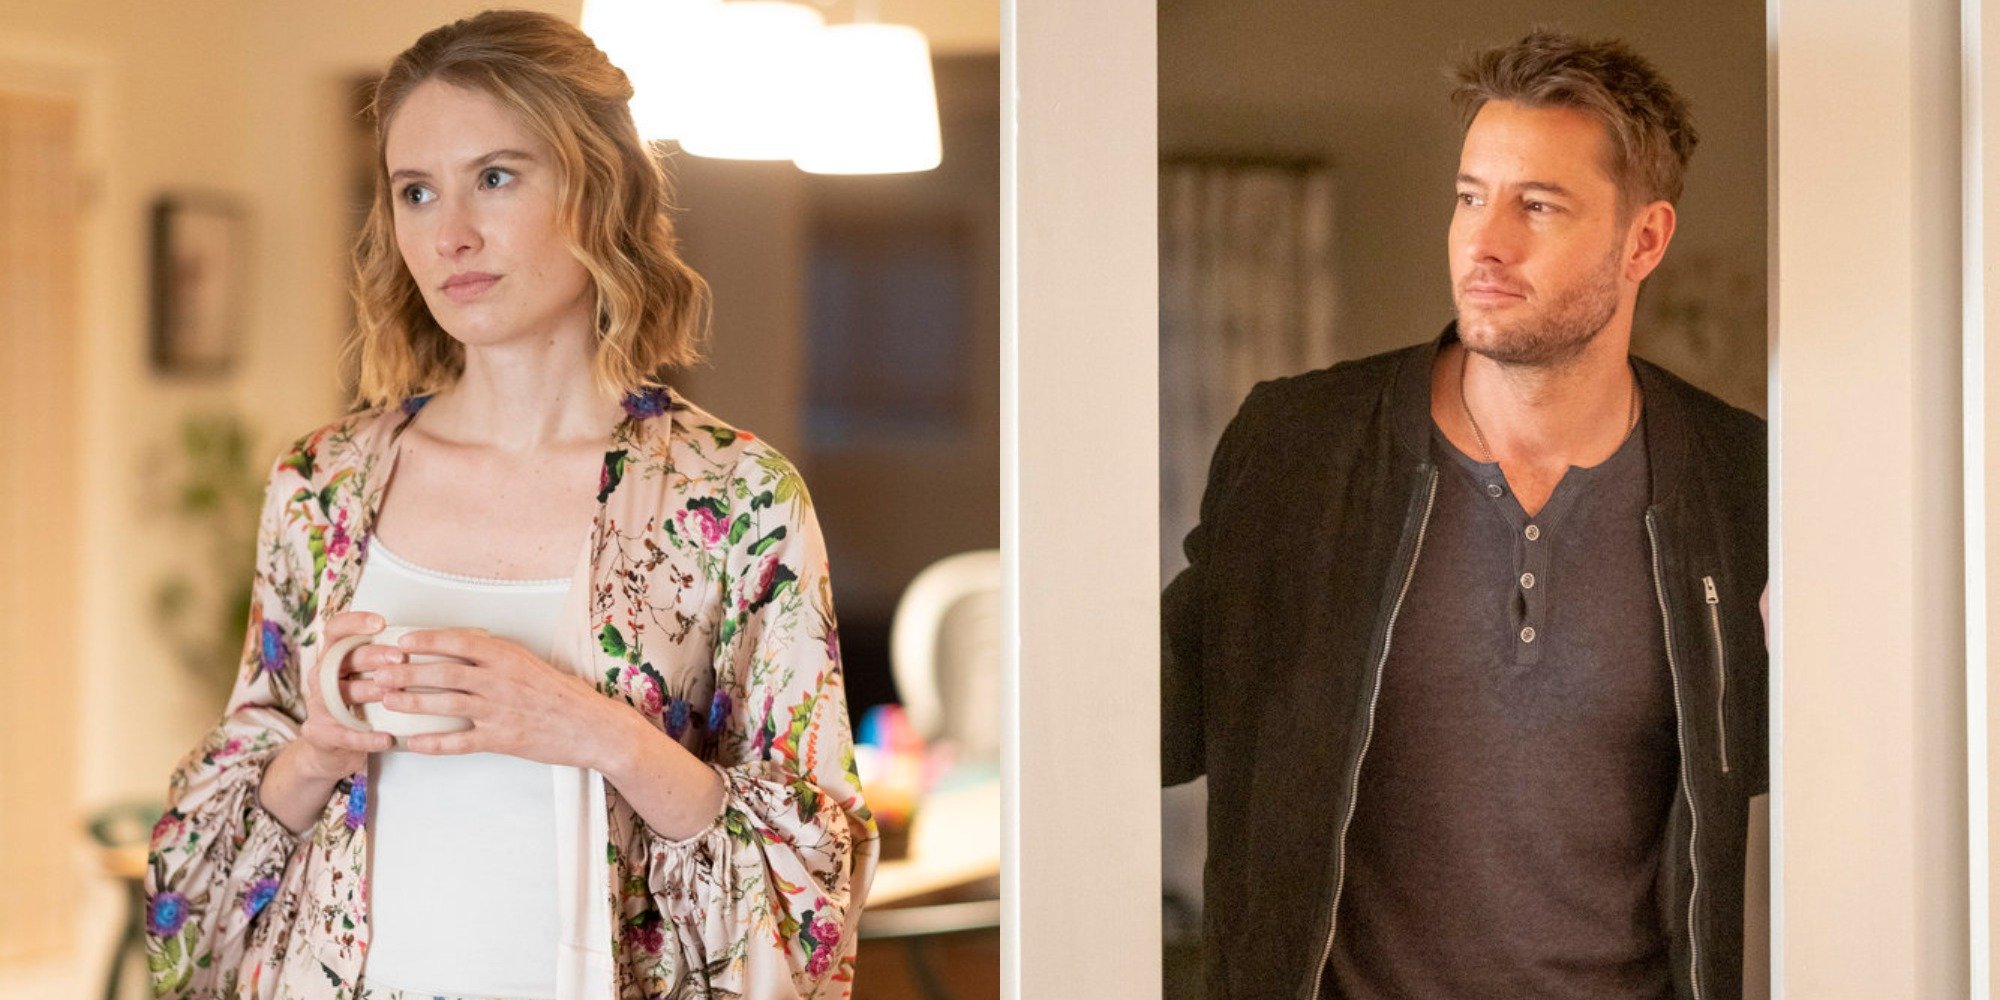 Caitlin Thompson and Justin Hartley in side-by-side images on the set of "This Is Us."